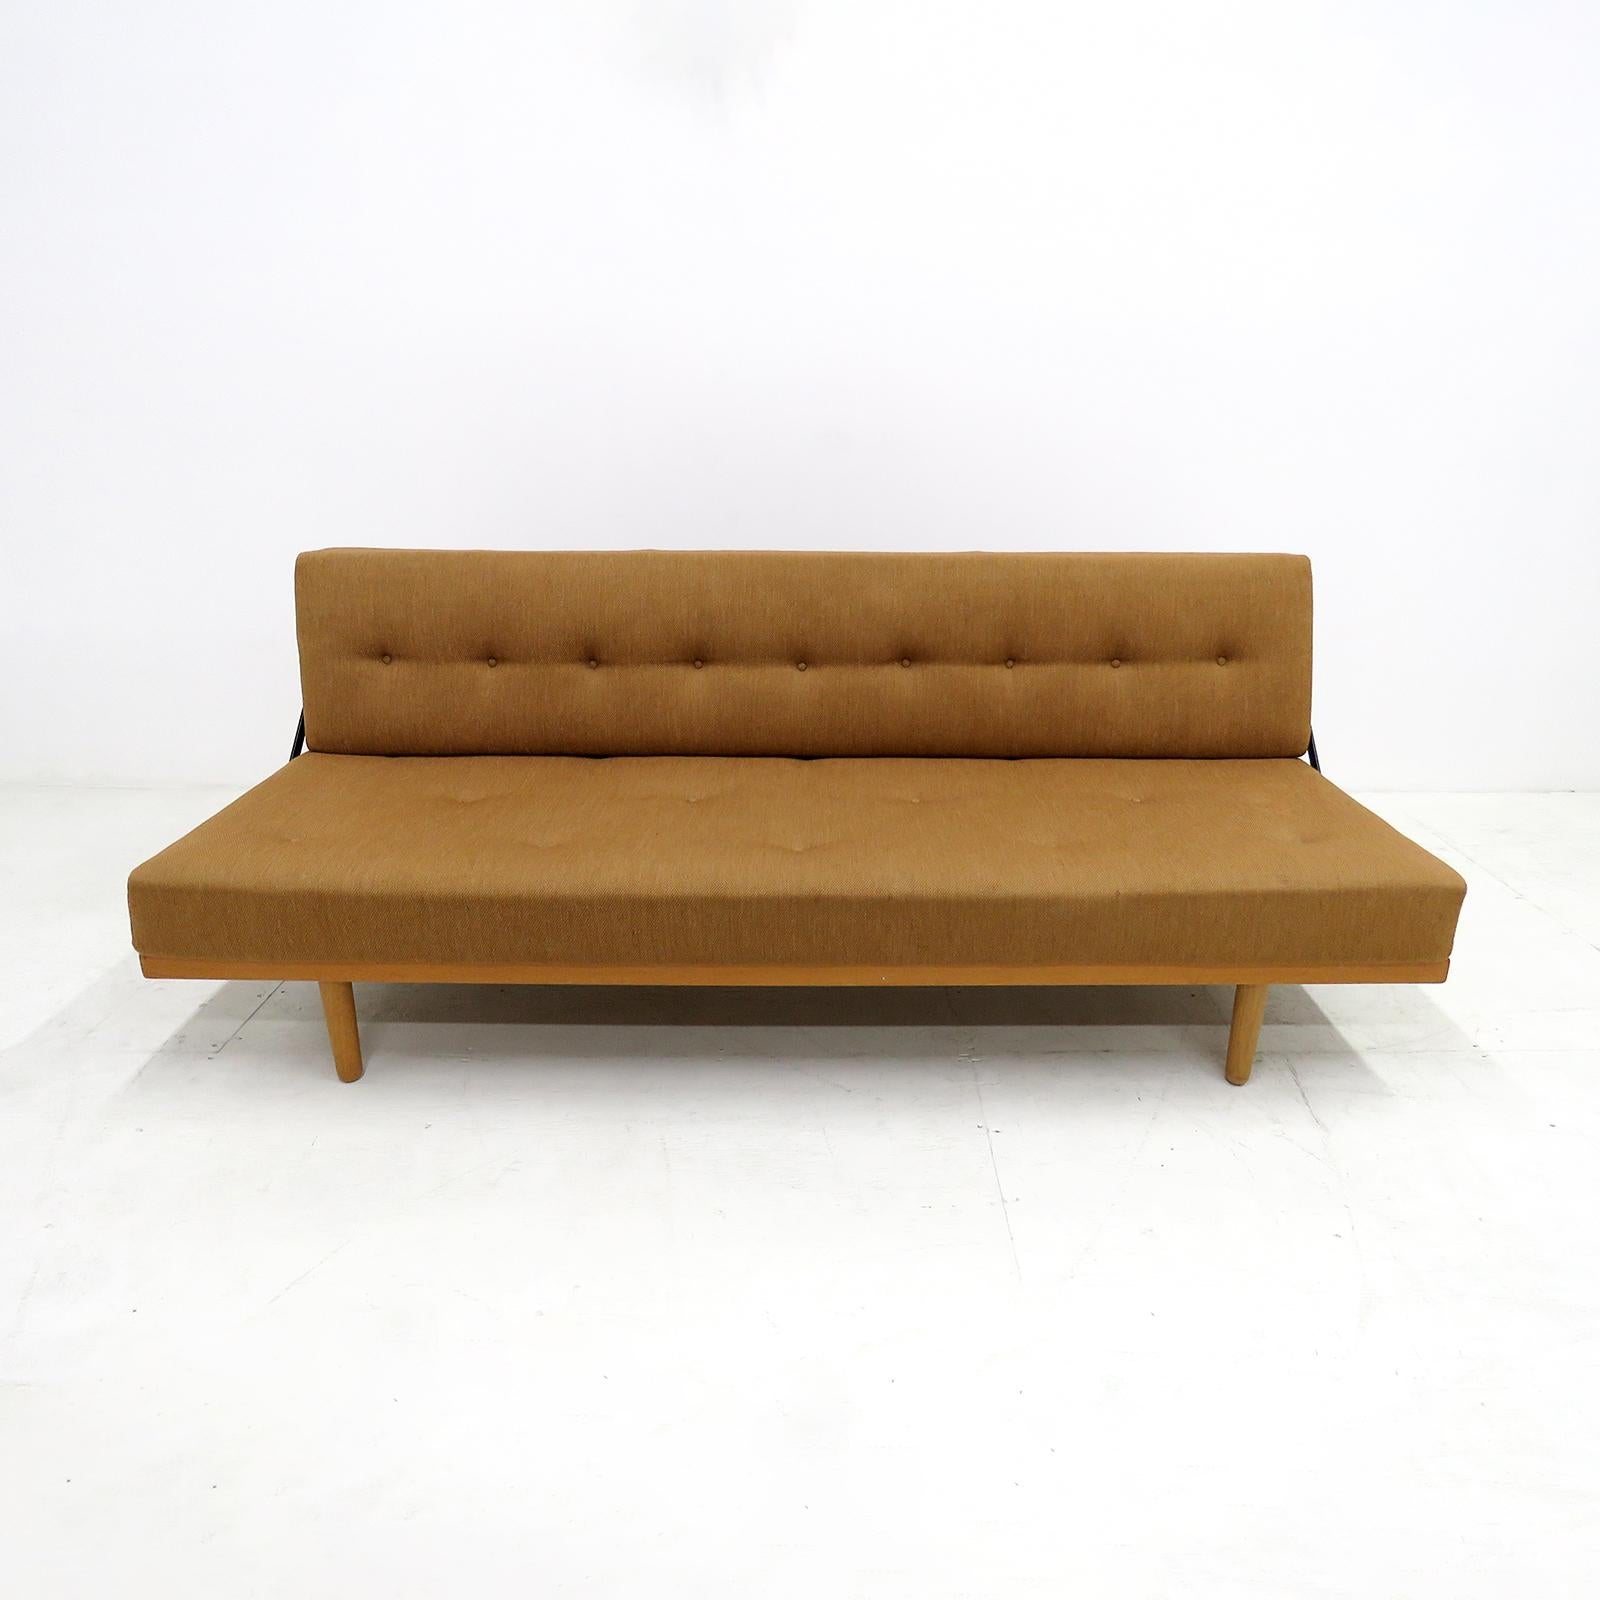 Stunning daybed model  no. 190, designed by Børge Mogensen in 1963 and produced by Frederica Stolefabrik, Denmark, solid oak frame platform with tapered legs and a vertical slatted back. The back is attached to the base with dowels across the